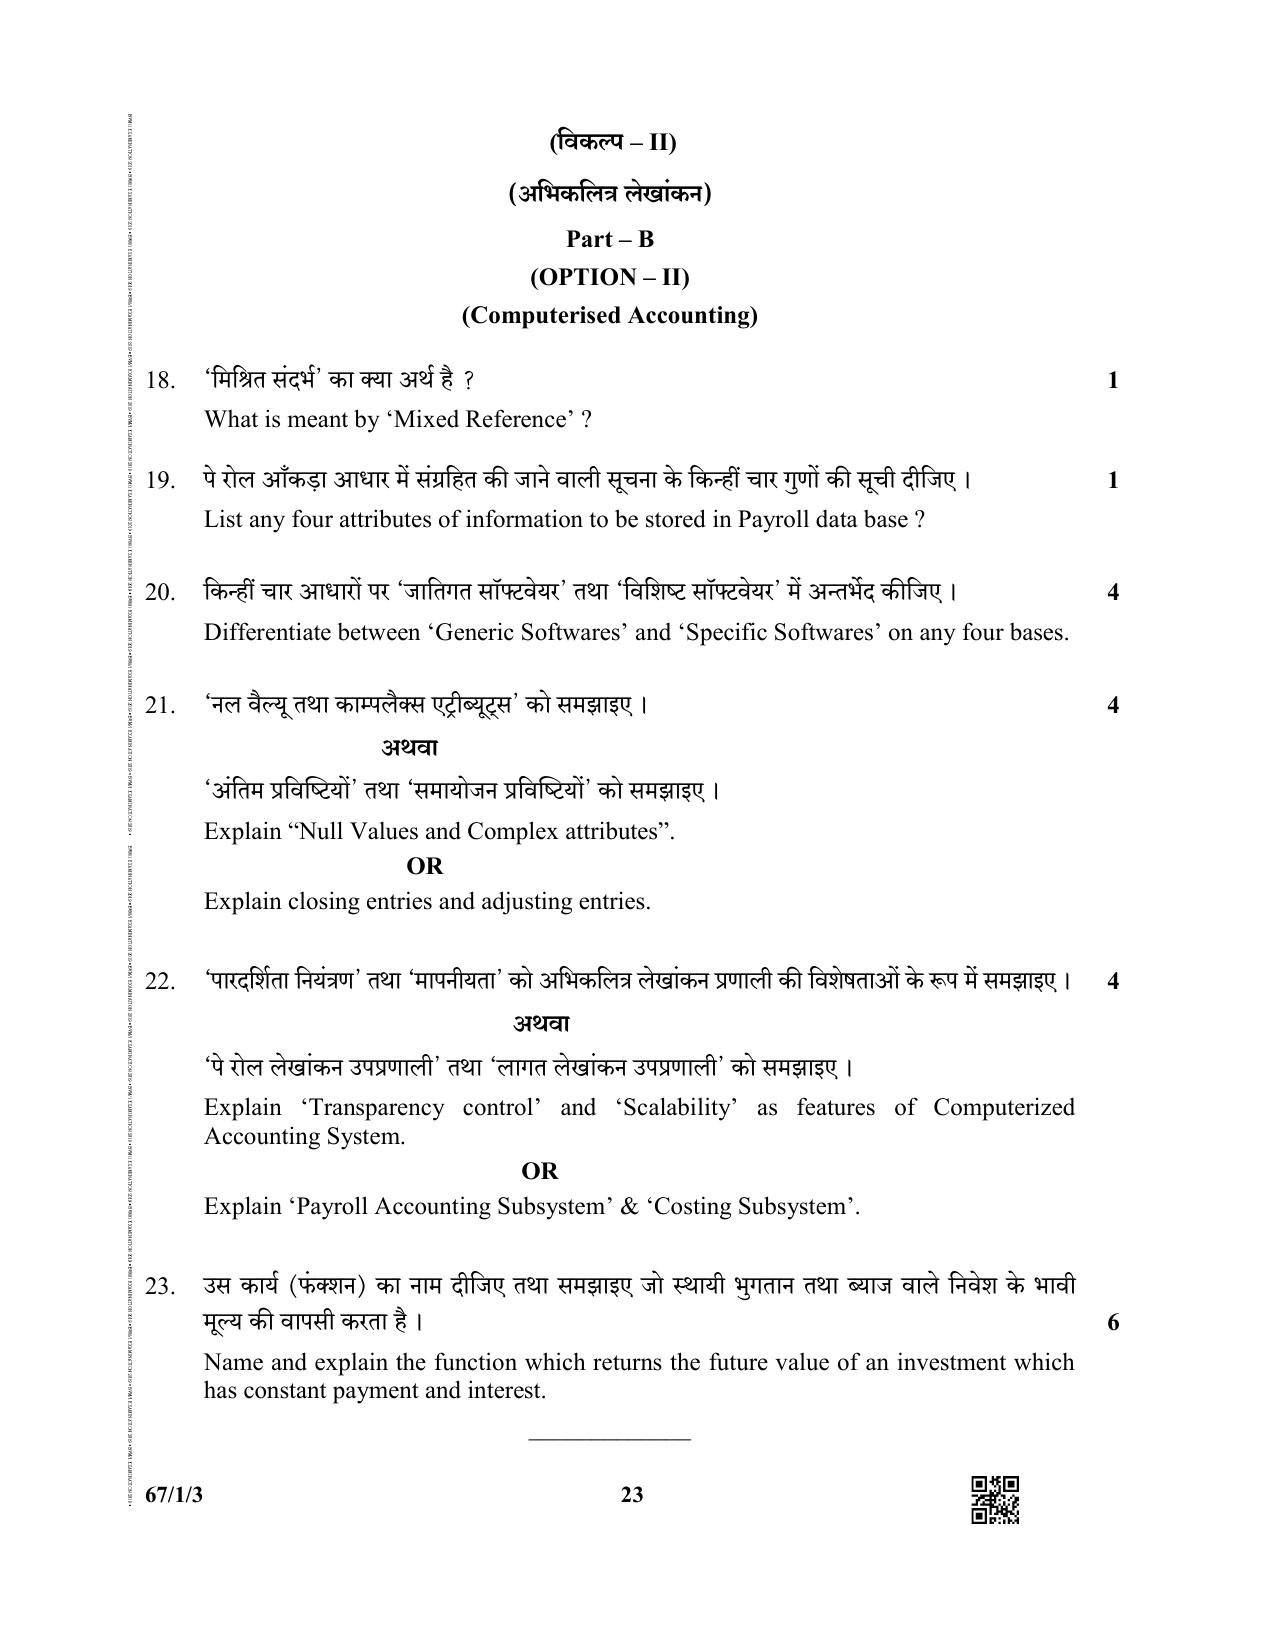 CBSE Class 12 67-1-3  (Accountancy) 2019 Question Paper - Page 23